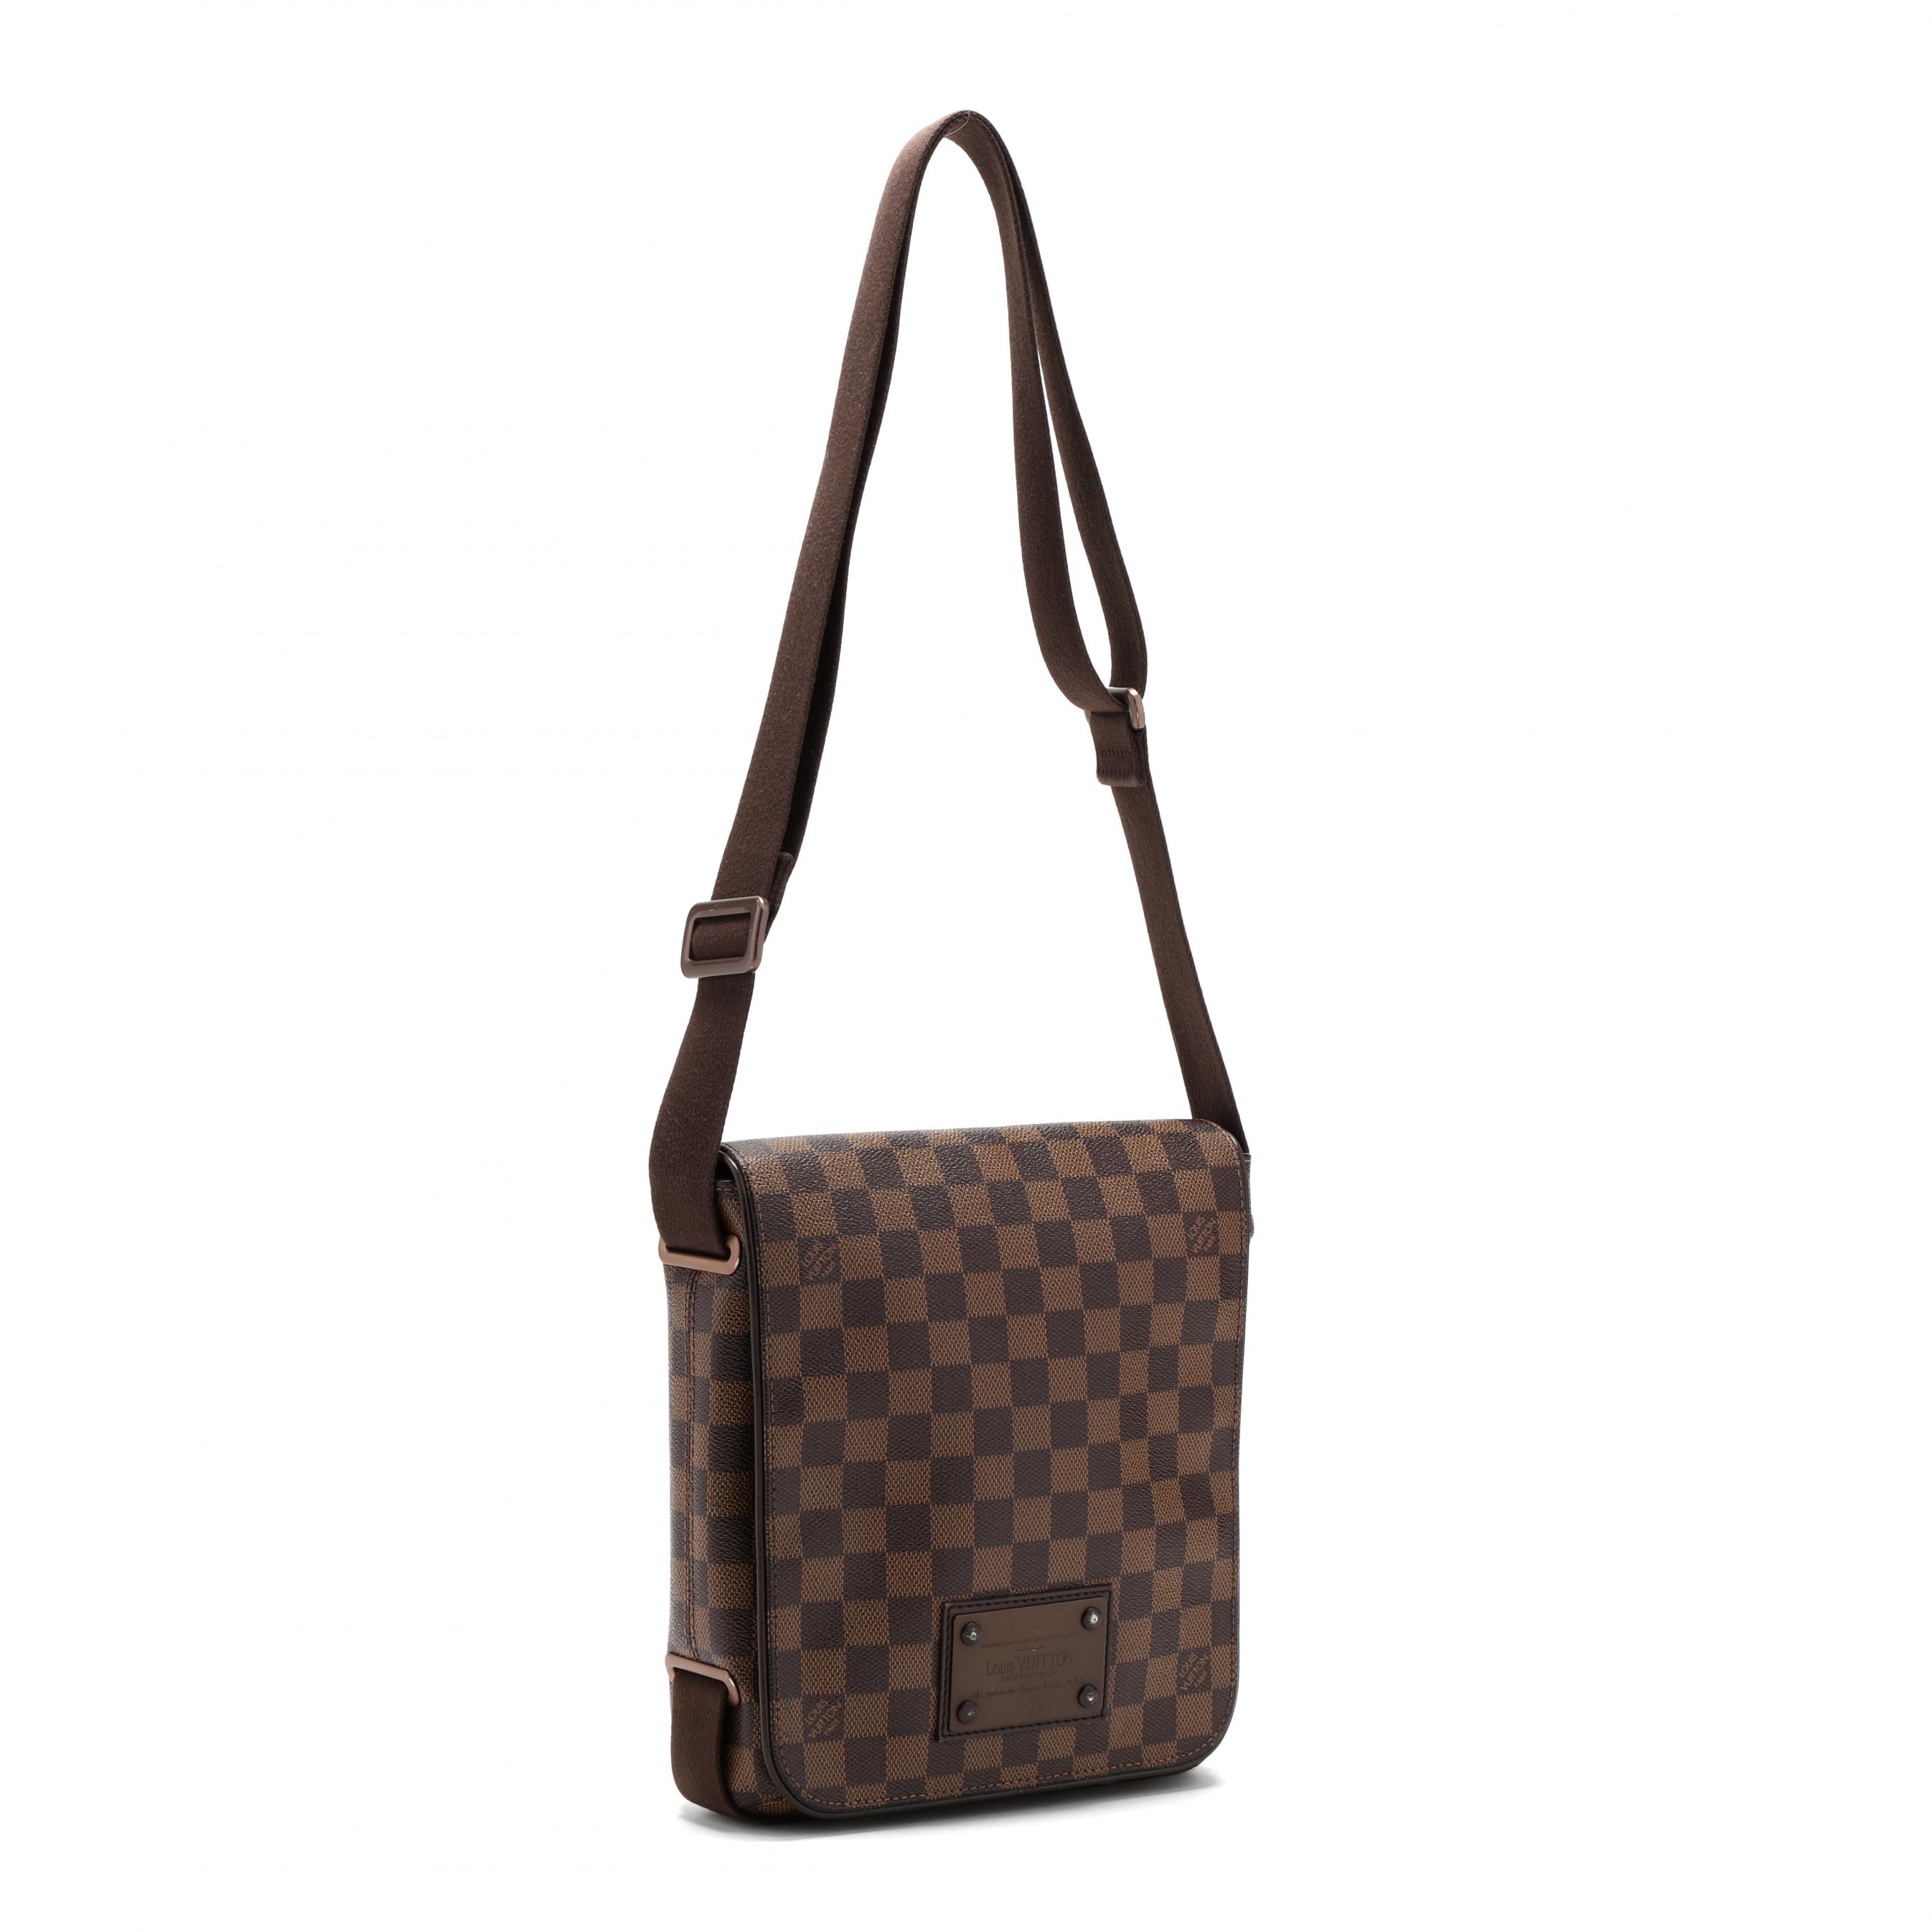 Sold at Auction: LOUIS VUITTON - BROOKLYN PM